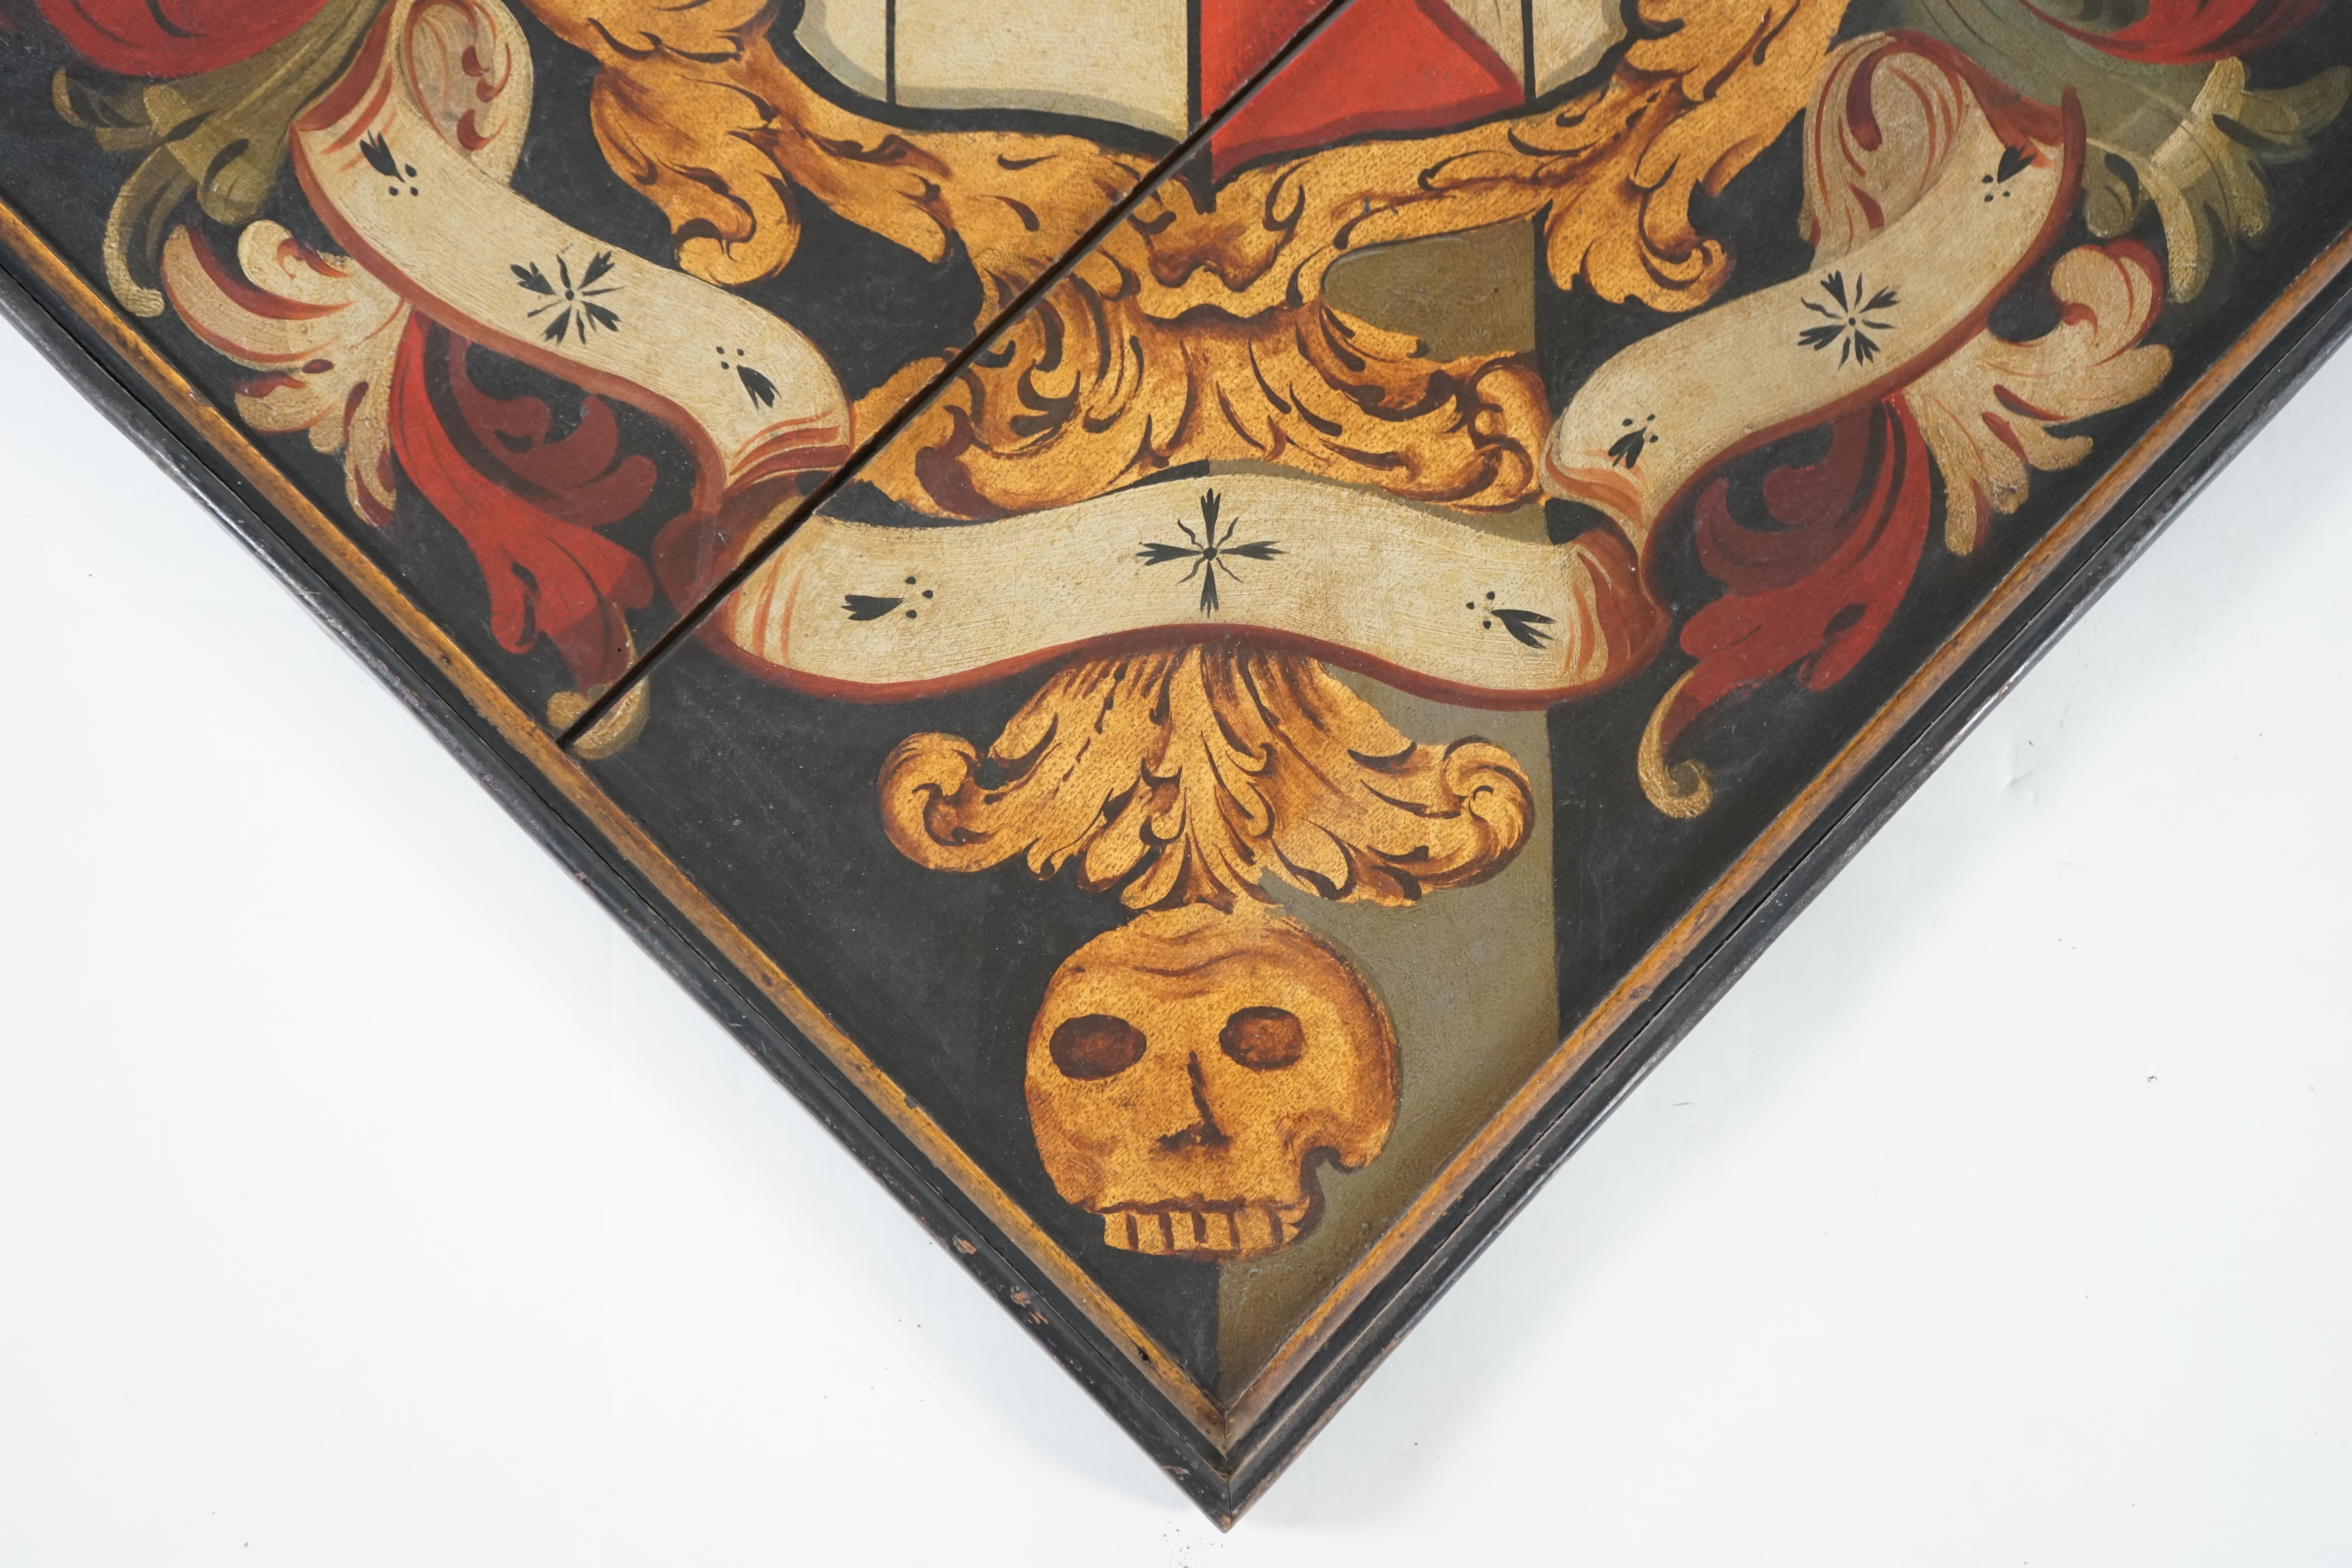 A late 18th / early 19th century oil on wooden panel hatchment